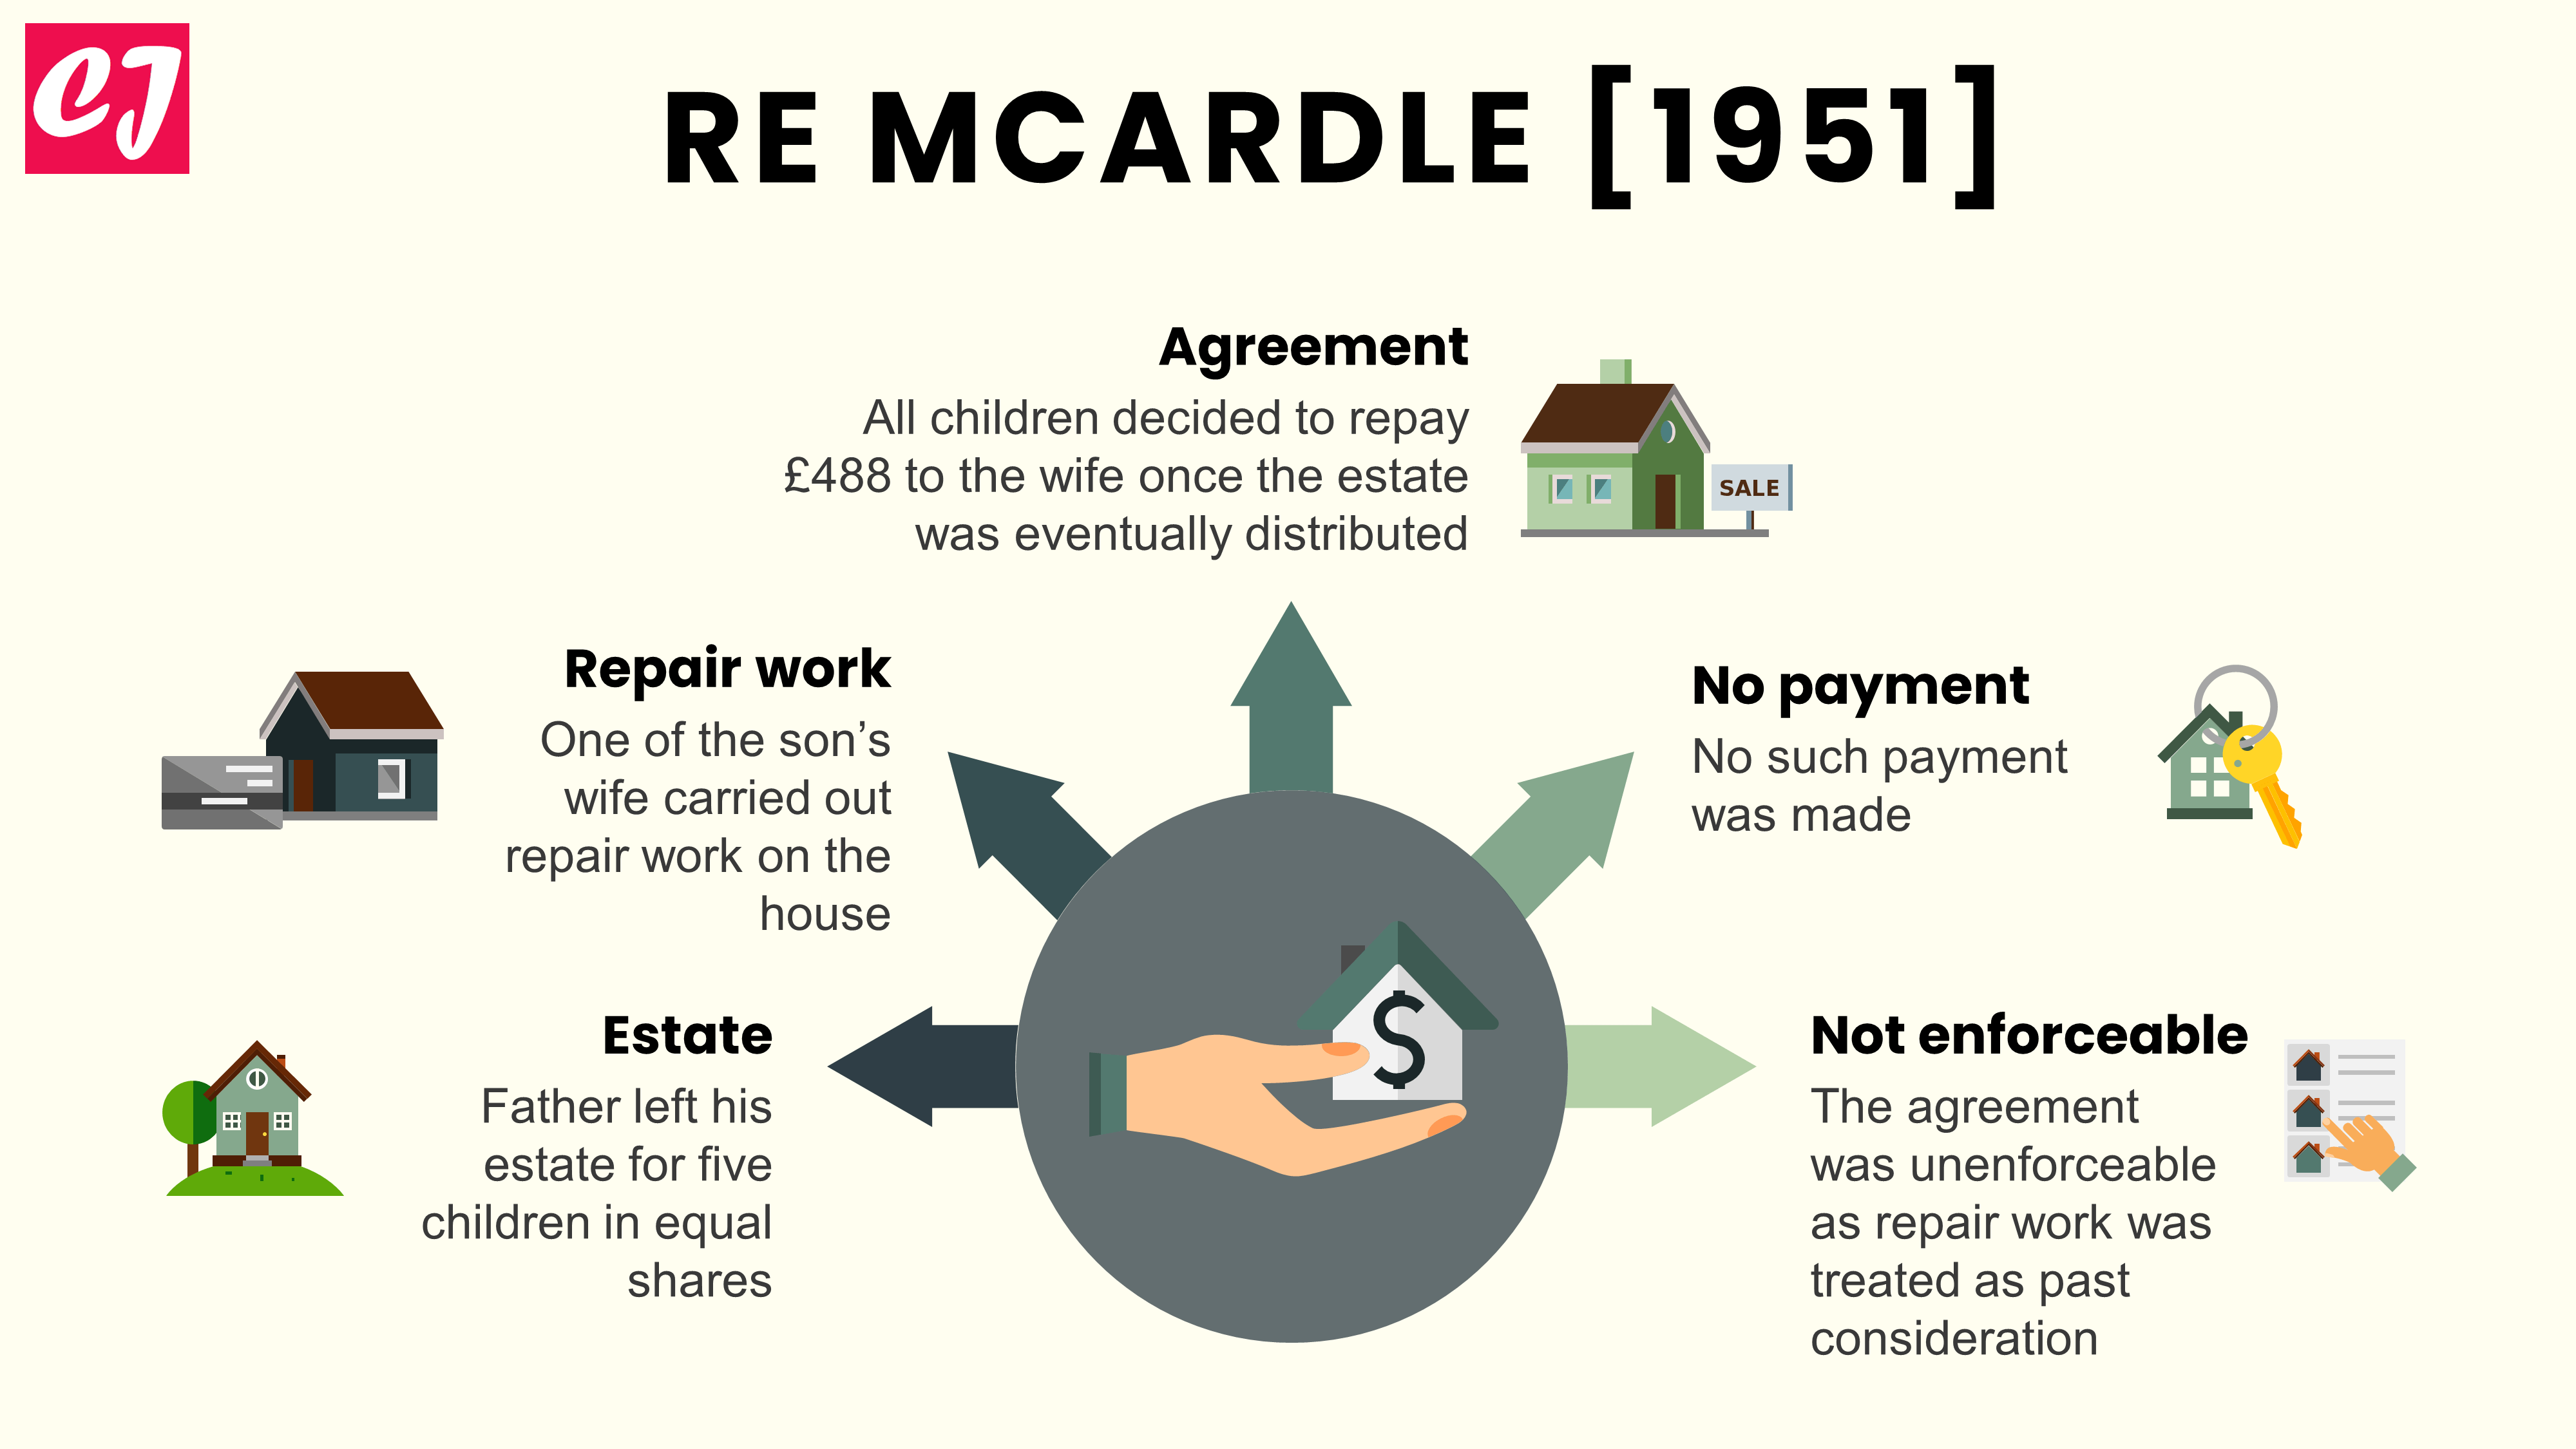 Re McArdle